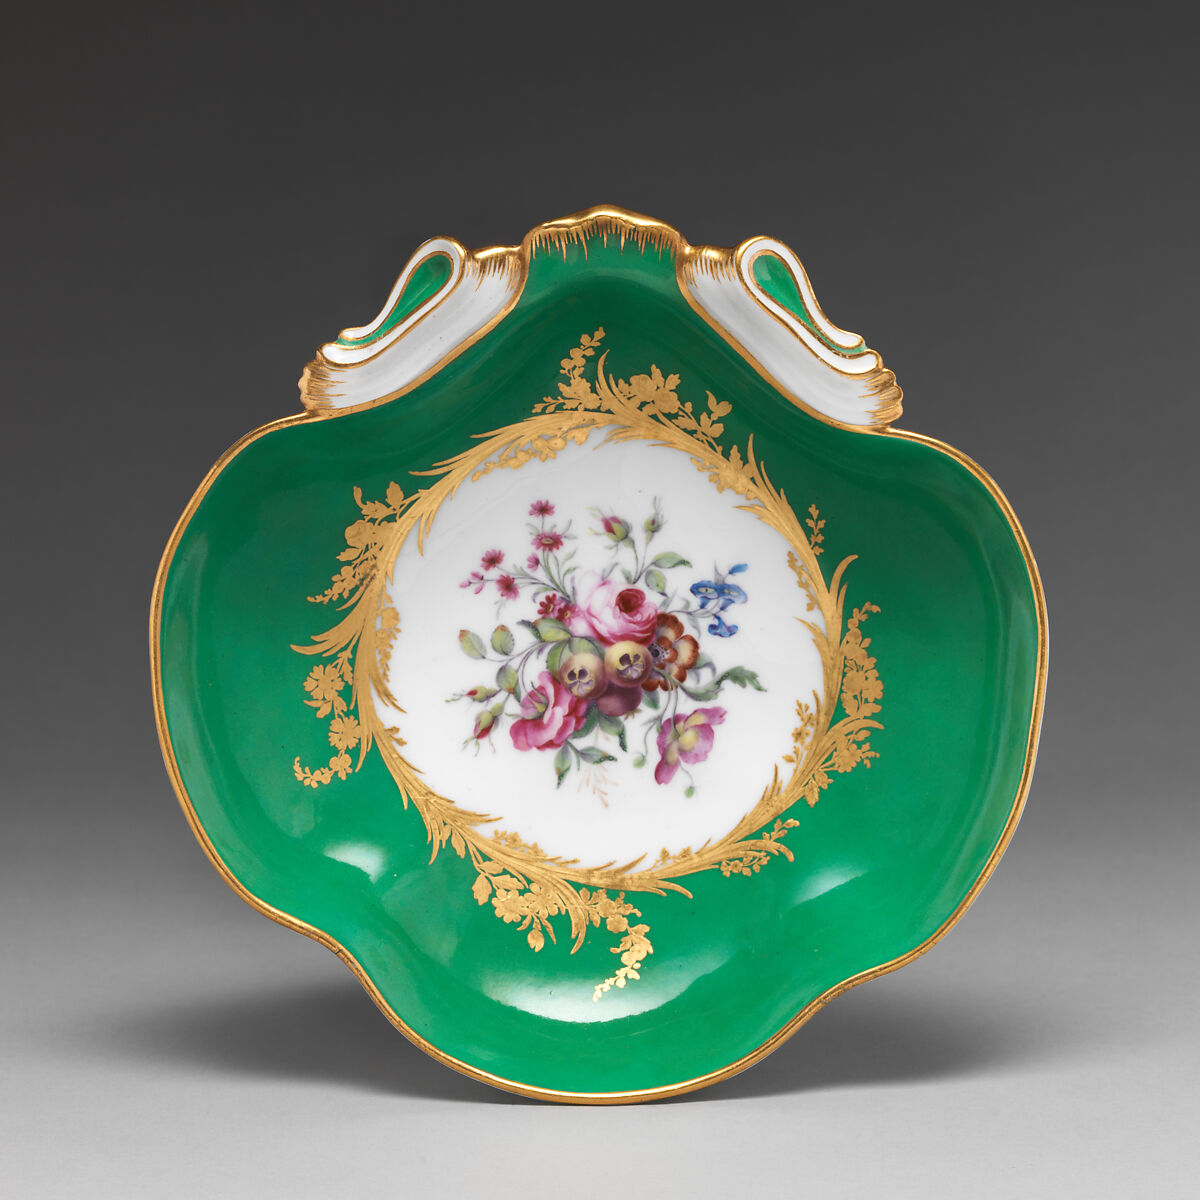 Fruit dish (compotier coquille) (one of four) (part of a service), Sèvres Manufactory (French, 1740–present), Soft-paste porcelain, French, Sèvres 